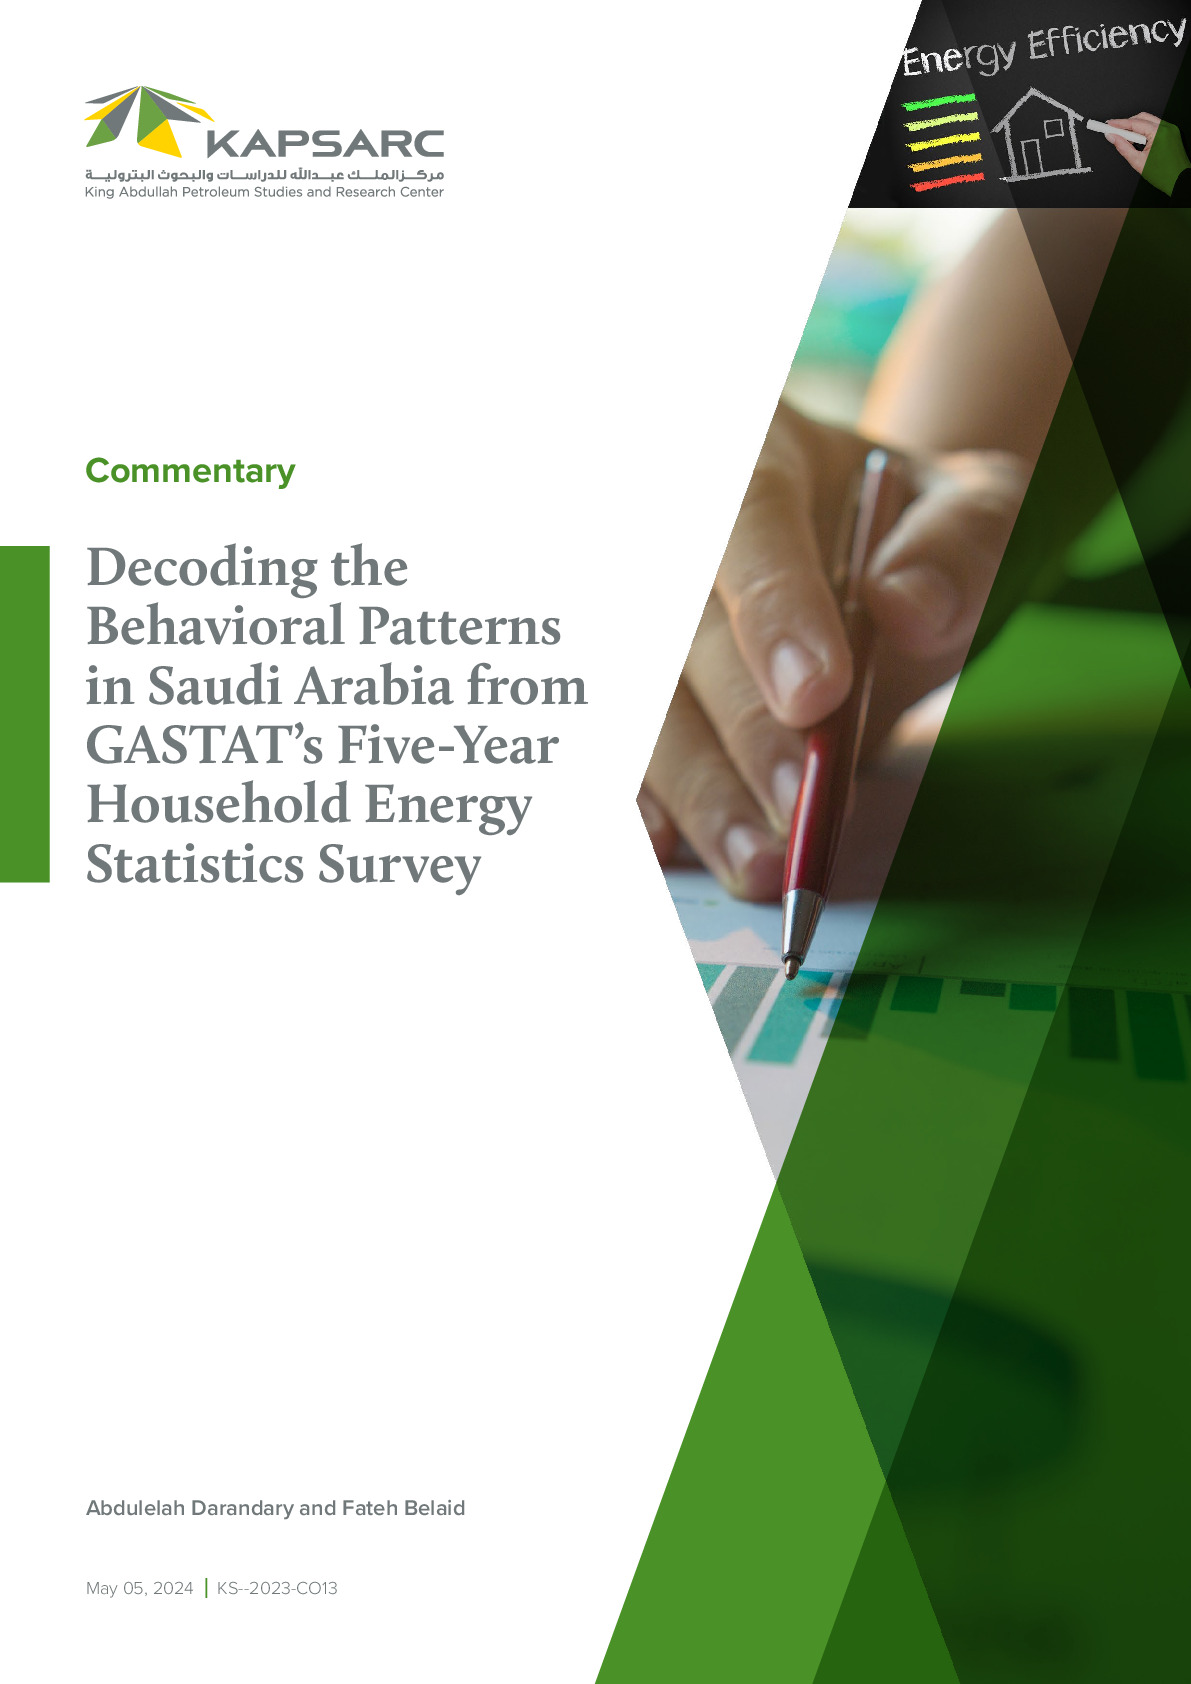 Decoding the Behavioral Patterns in Saudi Arabia from GASTAT’s Five-Year Household Energy Statistics Survey